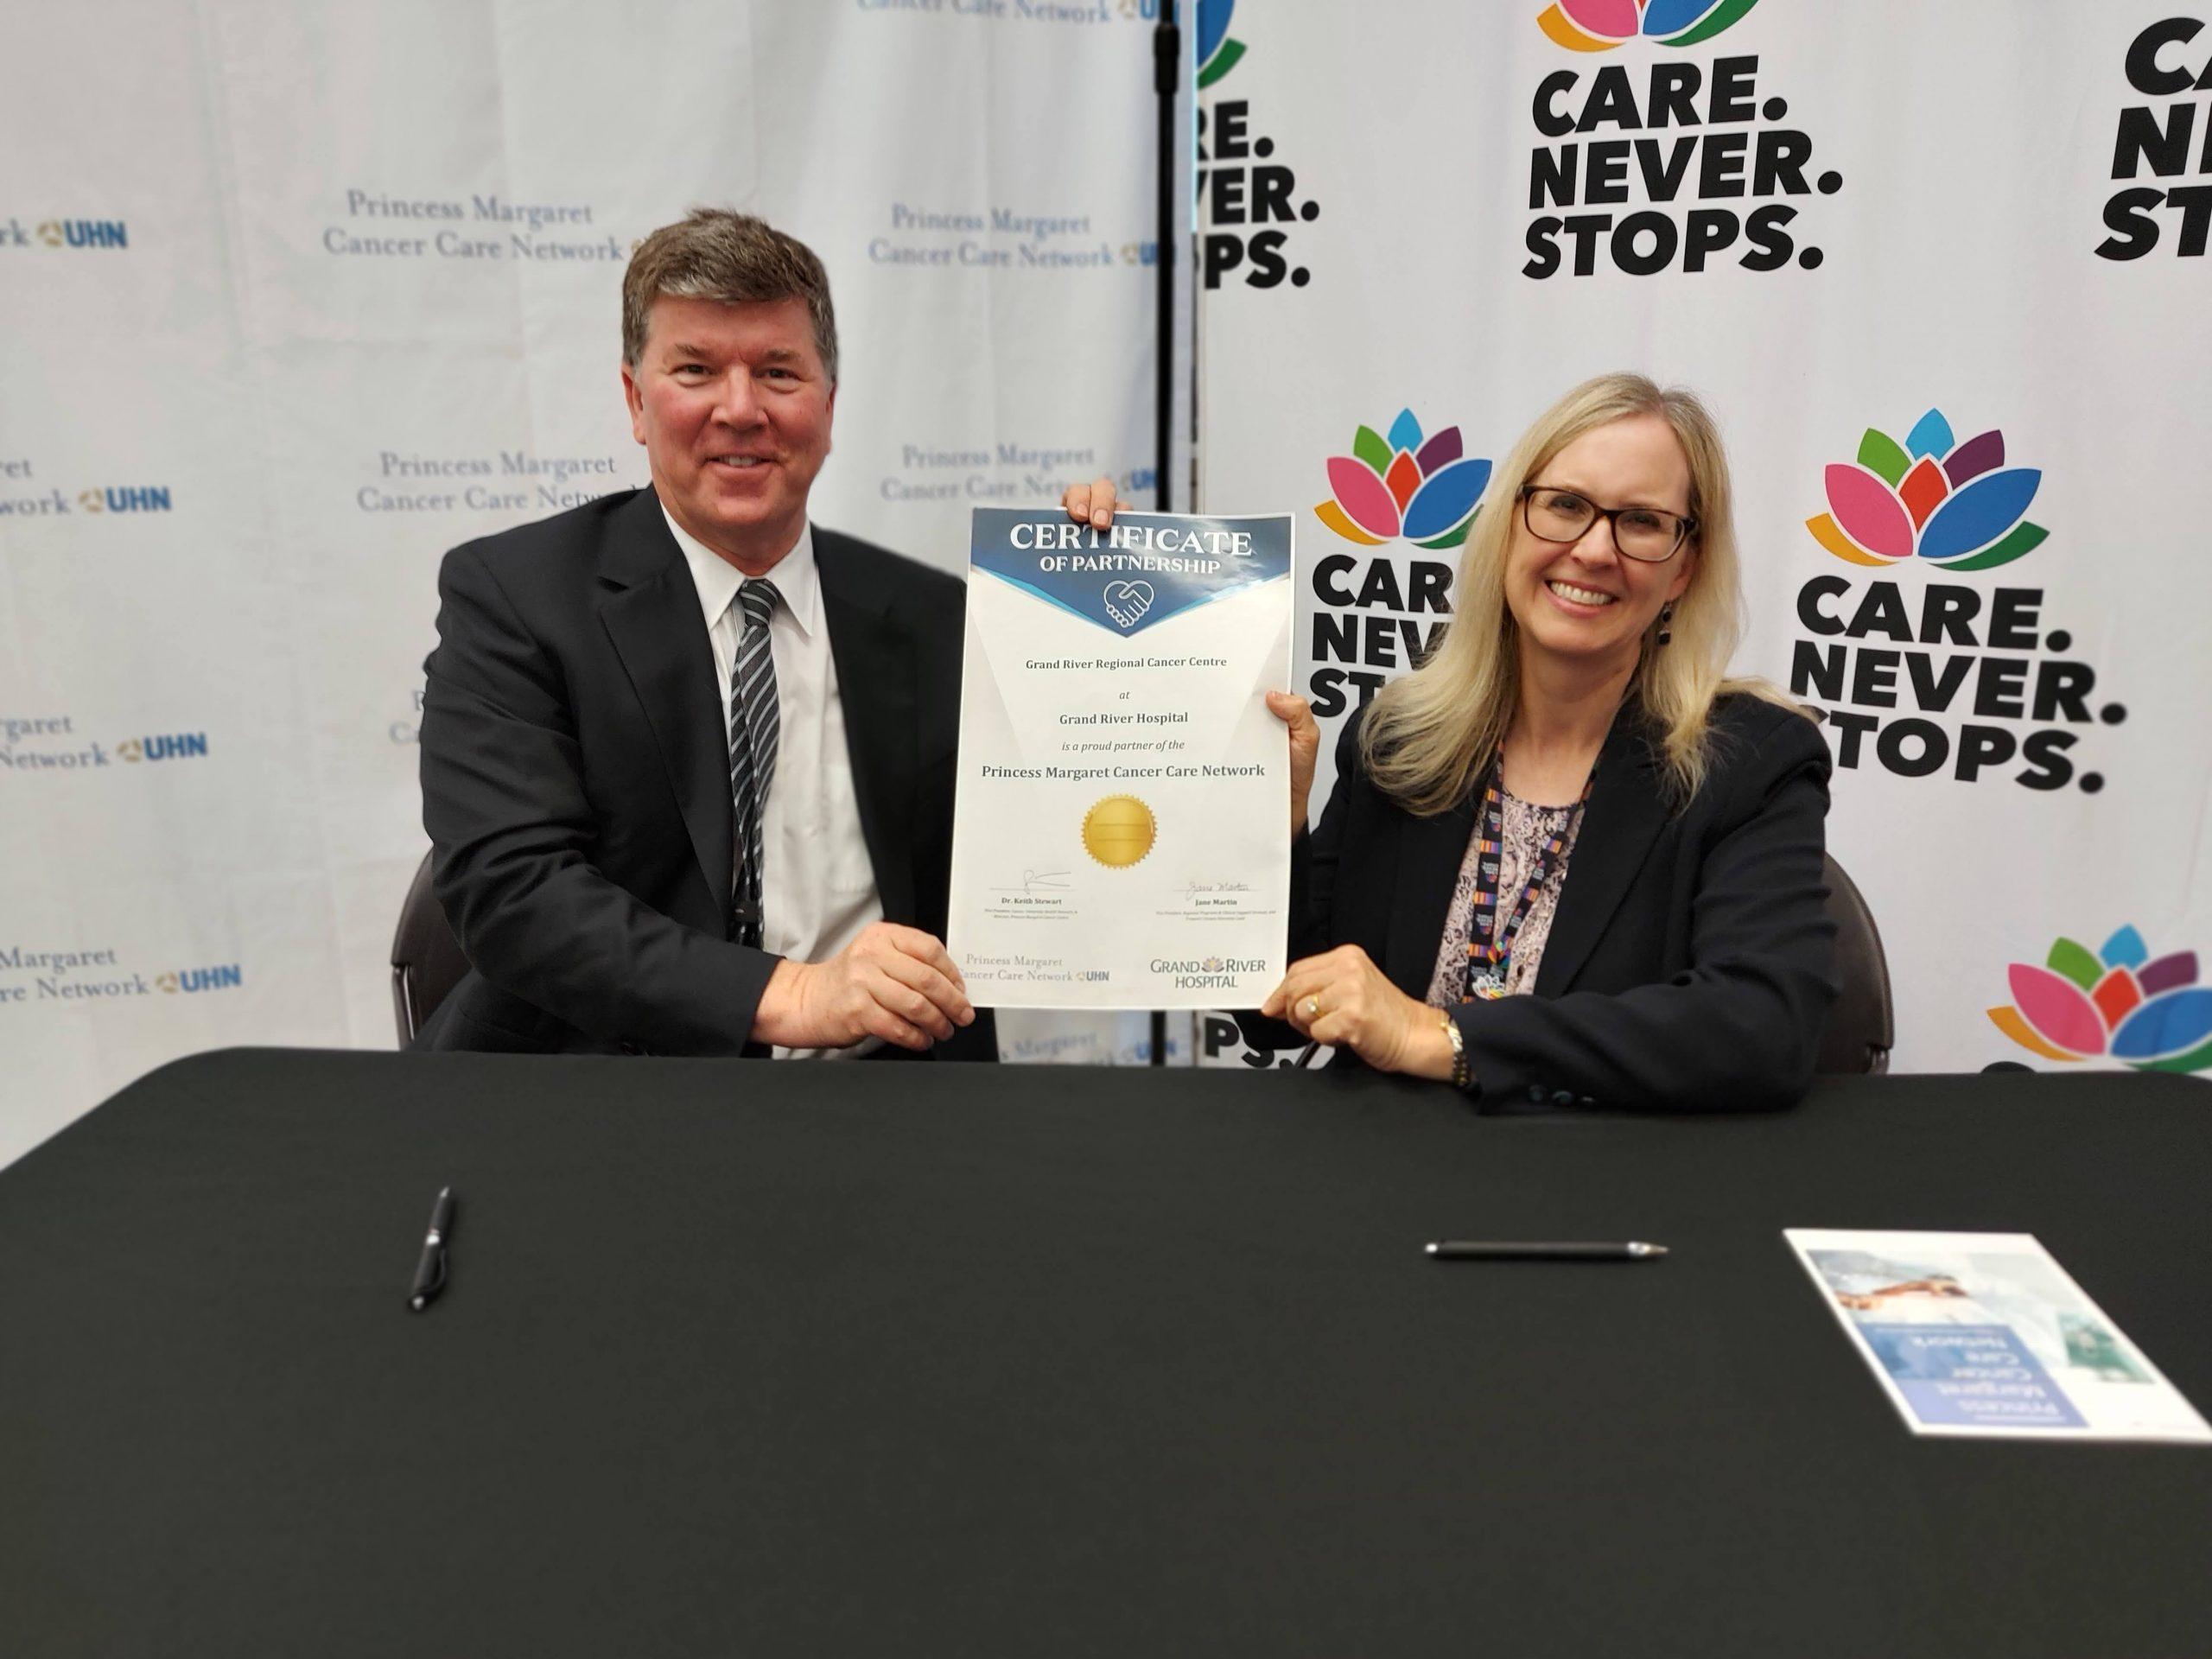 From left to right: Dr. Keith Stewart, VP Cancer, UHN, and Director, Princess Margaret Cancer Centre; Dr. Jane Martin, VP Clinical and Diagnostic Services, RVP, Waterloo Wellington Regional Cancer Program